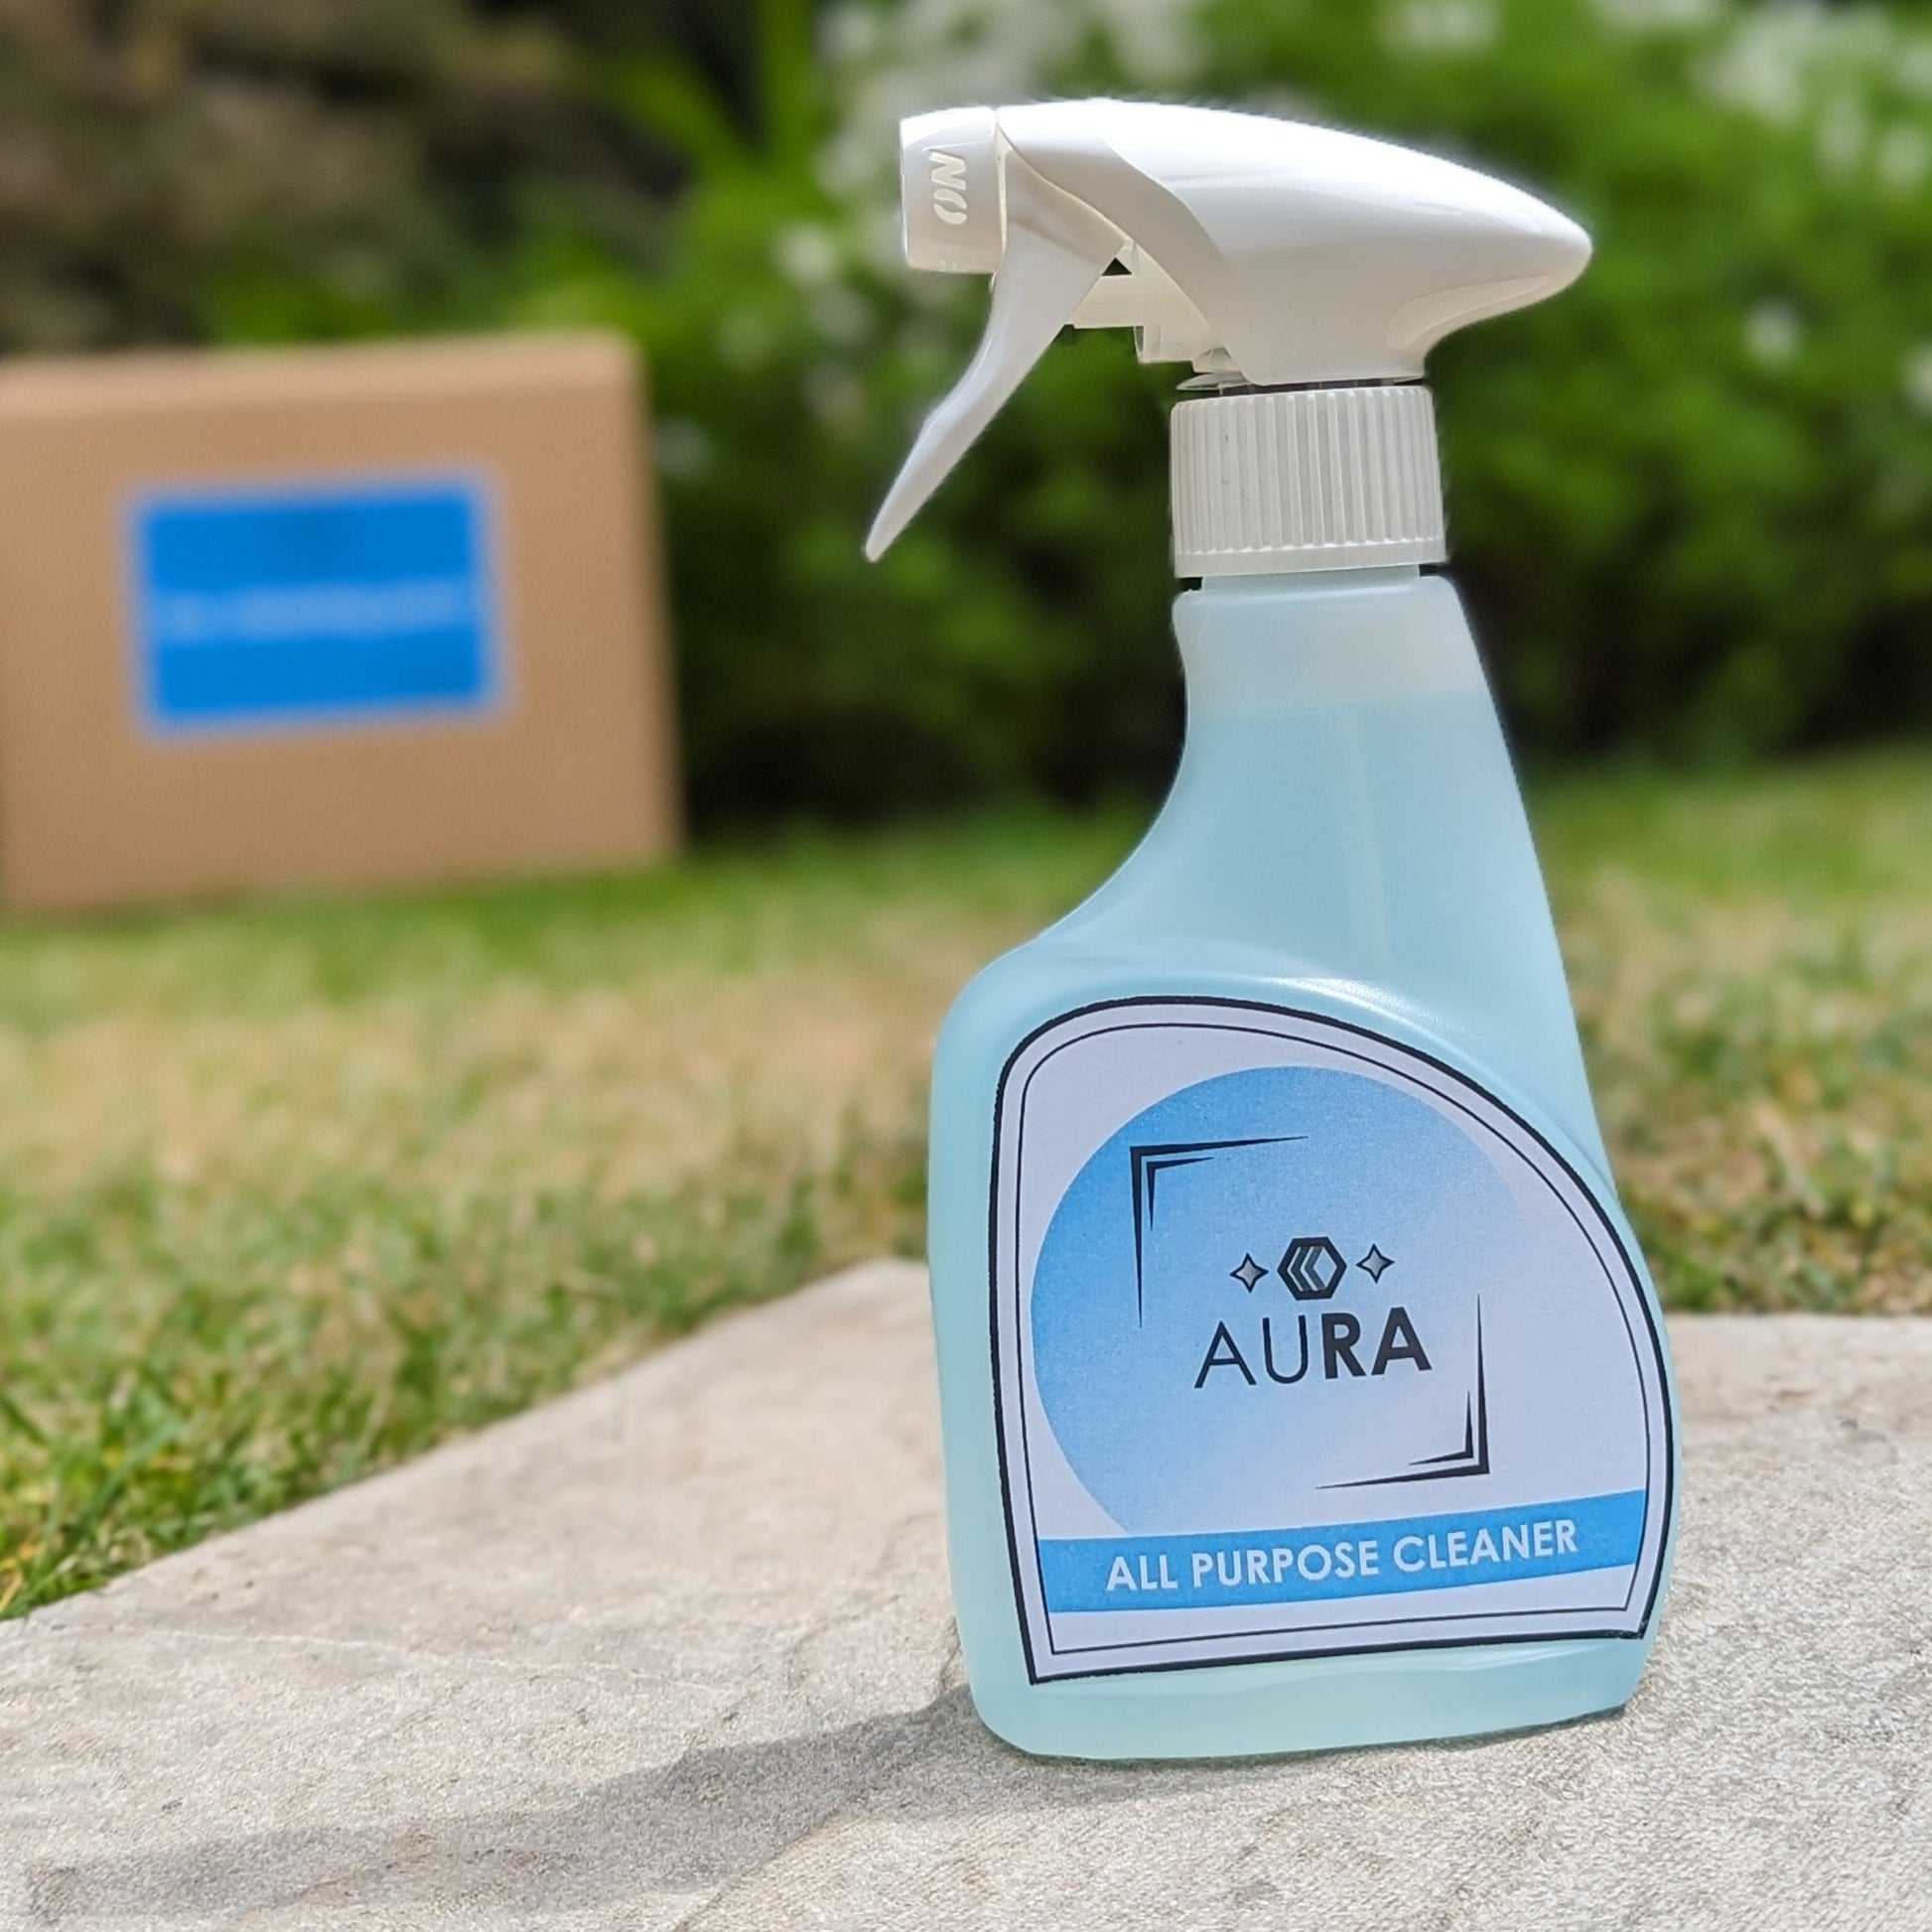 Cleaning Products | Sparkling Surfaces  |Eco-Friendly Cleaning |  Multi-Surface Magic|  Effortless Shine|  Gentle yet Effective | Aromatherapy Clean |  Freshness Revived | One Cleaner  Many Uses  |AURA of Cleanliness